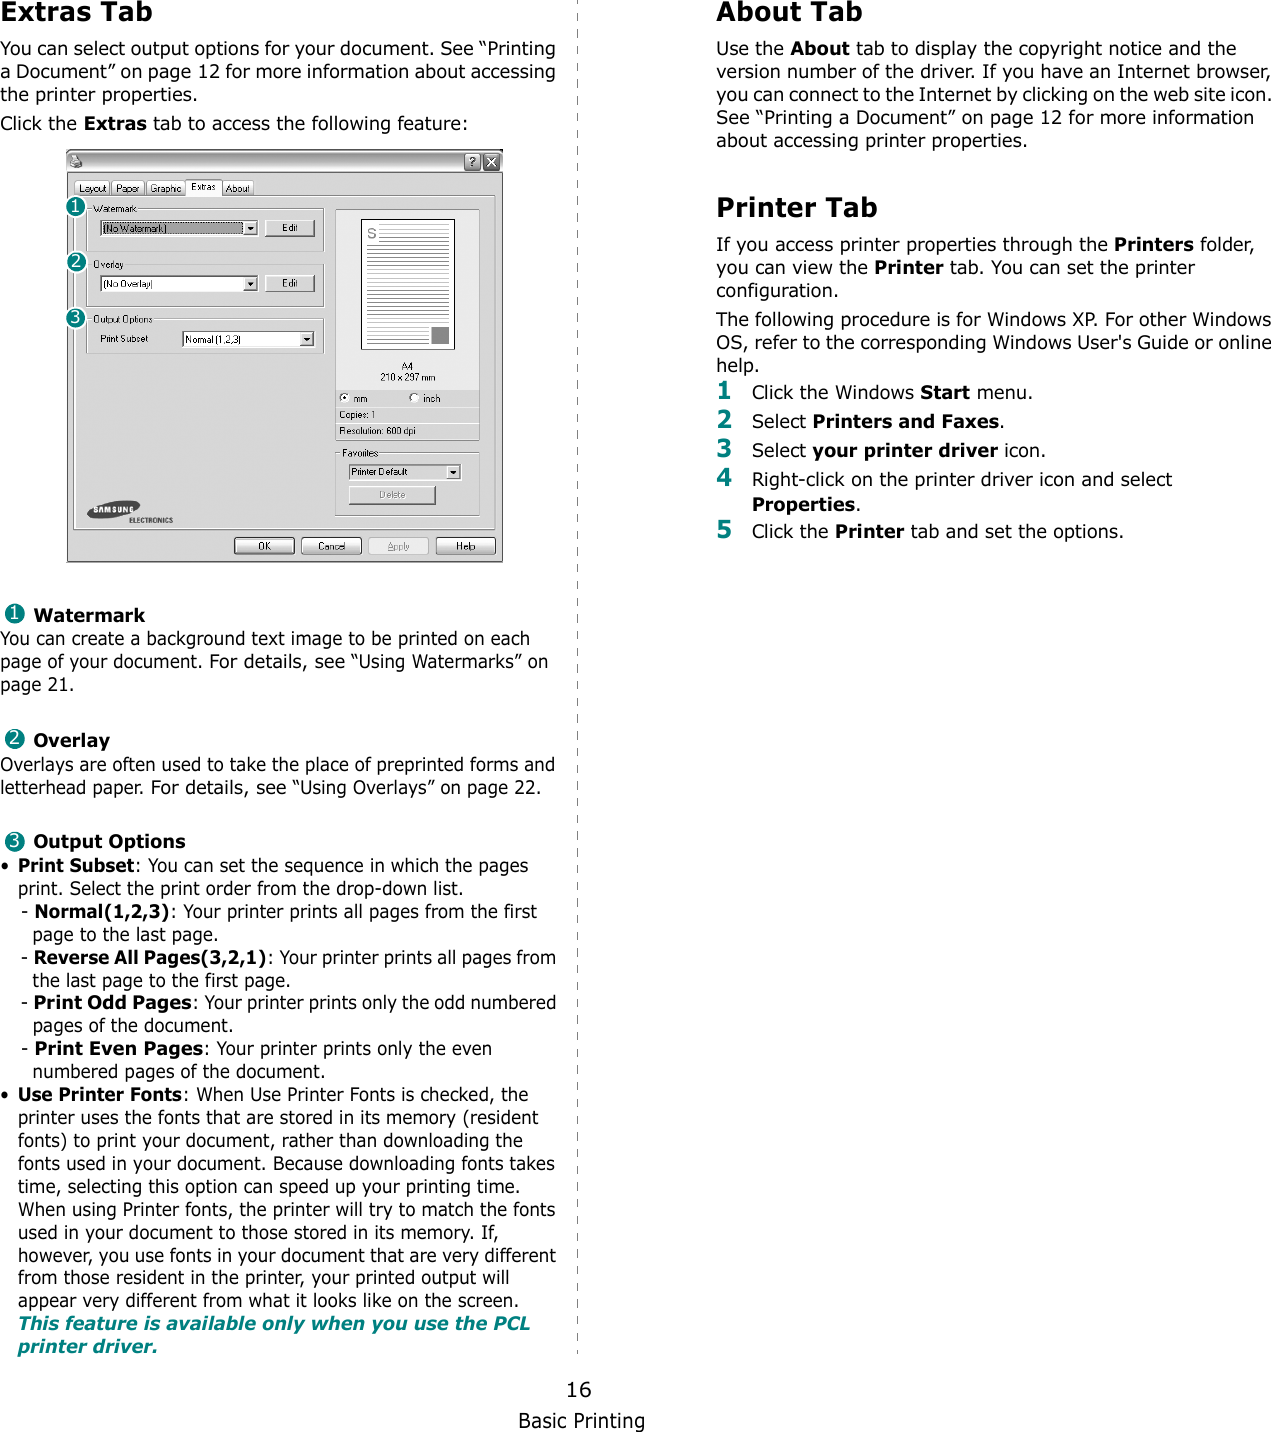 Basic Printing16Extras TabYou can select output options for your document. See “Printing a Document” on page 12 for more information about accessing the printer properties.Click the Extras tab to access the following feature:  WatermarkYou can create a background text image to be printed on each page of your document. For details, see “Using Watermarks” on page 21.OverlayOverlays are often used to take the place of preprinted forms and letterhead paper. For details, see “Using Overlays” on page 22.Output Options•Print Subset: You can set the sequence in which the pages print. Select the print order from the drop-down list.- Normal(1,2,3): Your printer prints all pages from the first page to the last page.- Reverse All Pages(3,2,1): Your printer prints all pages from the last page to the first page.- Print Odd Pages: Your printer prints only the odd numbered pages of the document.- Print Even Pages: Your printer prints only the even numbered pages of the document.•Use Printer Fonts: When Use Printer Fonts is checked, the printer uses the fonts that are stored in its memory (resident fonts) to print your document, rather than downloading the fonts used in your document. Because downloading fonts takes time, selecting this option can speed up your printing time. When using Printer fonts, the printer will try to match the fonts used in your document to those stored in its memory. If, however, you use fonts in your document that are very different from those resident in the printer, your printed output will appear very different from what it looks like on the screen.  This feature is available only when you use the PCL printer driver.123123About TabUse the About tab to display the copyright notice and the version number of the driver. If you have an Internet browser, you can connect to the Internet by clicking on the web site icon. See “Printing a Document” on page 12 for more information about accessing printer properties.Printer TabIf you access printer properties through the Printers folder, you can view the Printer tab. You can set the printer configuration.The following procedure is for Windows XP. For other Windows OS, refer to the corresponding Windows User&apos;s Guide or online help.1Click the Windows Start menu. 2Select Printers and Faxes.3Select your printer driver icon. 4Right-click on the printer driver icon and select Properties.5Click the Printer tab and set the options.  